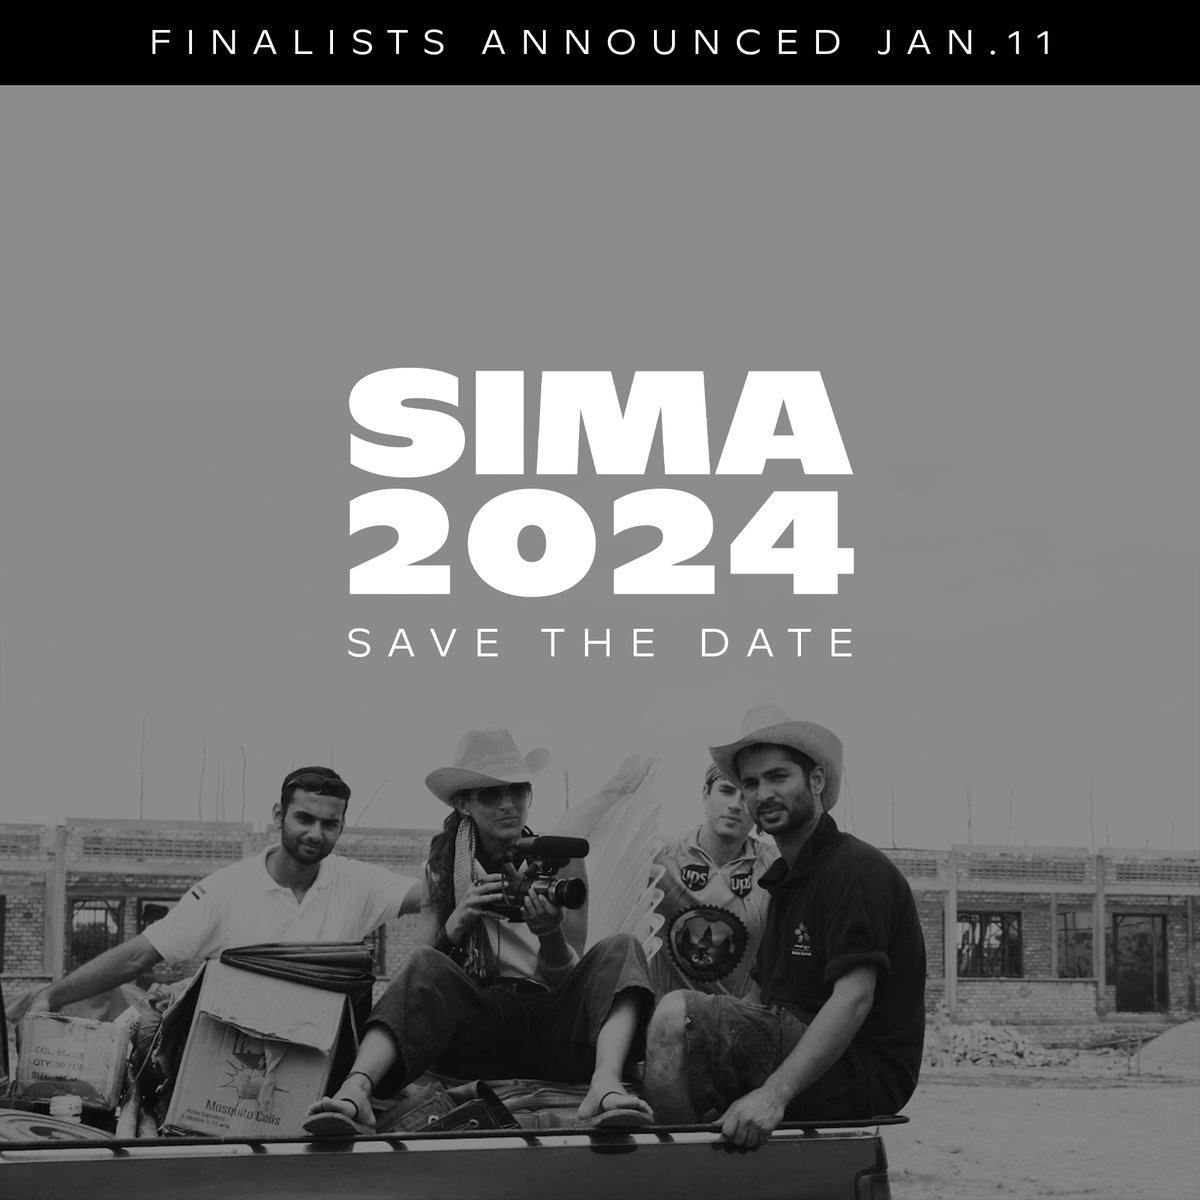 SAVE THE DATE: The finalists of The 12th Annual Social Impact Media Awards (#SIMA2024) will be announced in one week! Filmmakers, save the date + be sure to sign up for our newsletter to be the first to see the shortlist: bit.ly/48k4Nn2